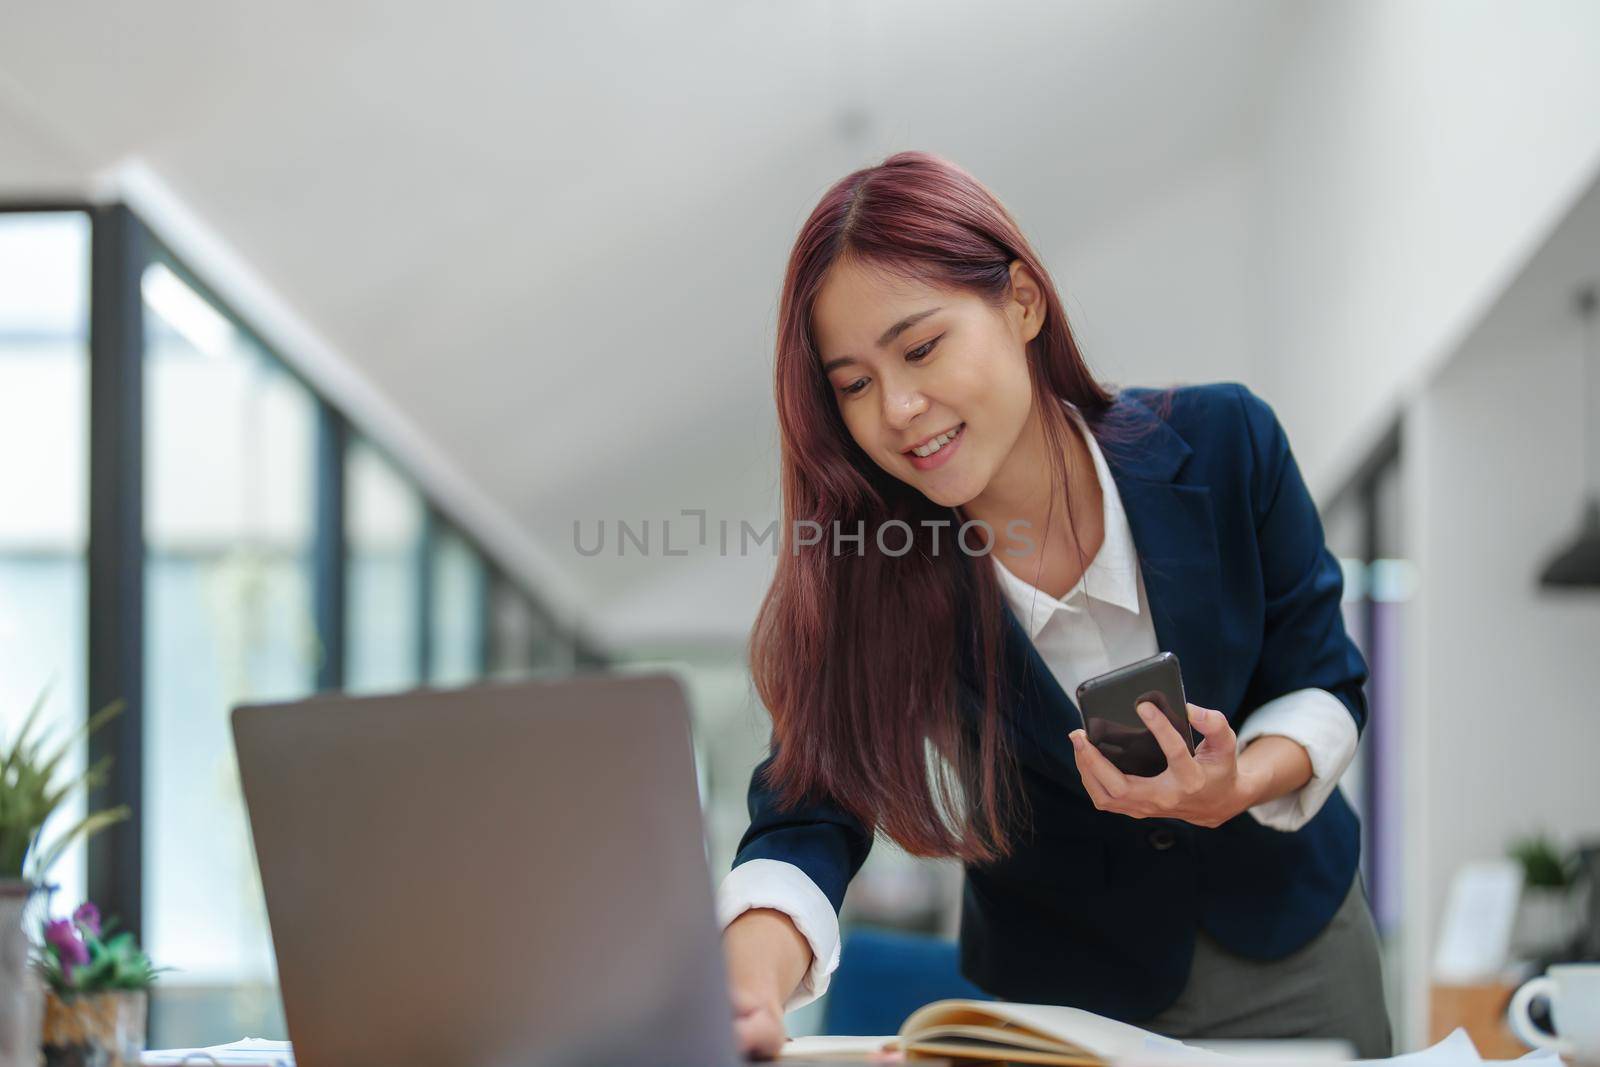 Asian businesswoman using the phone to contact a business partner.